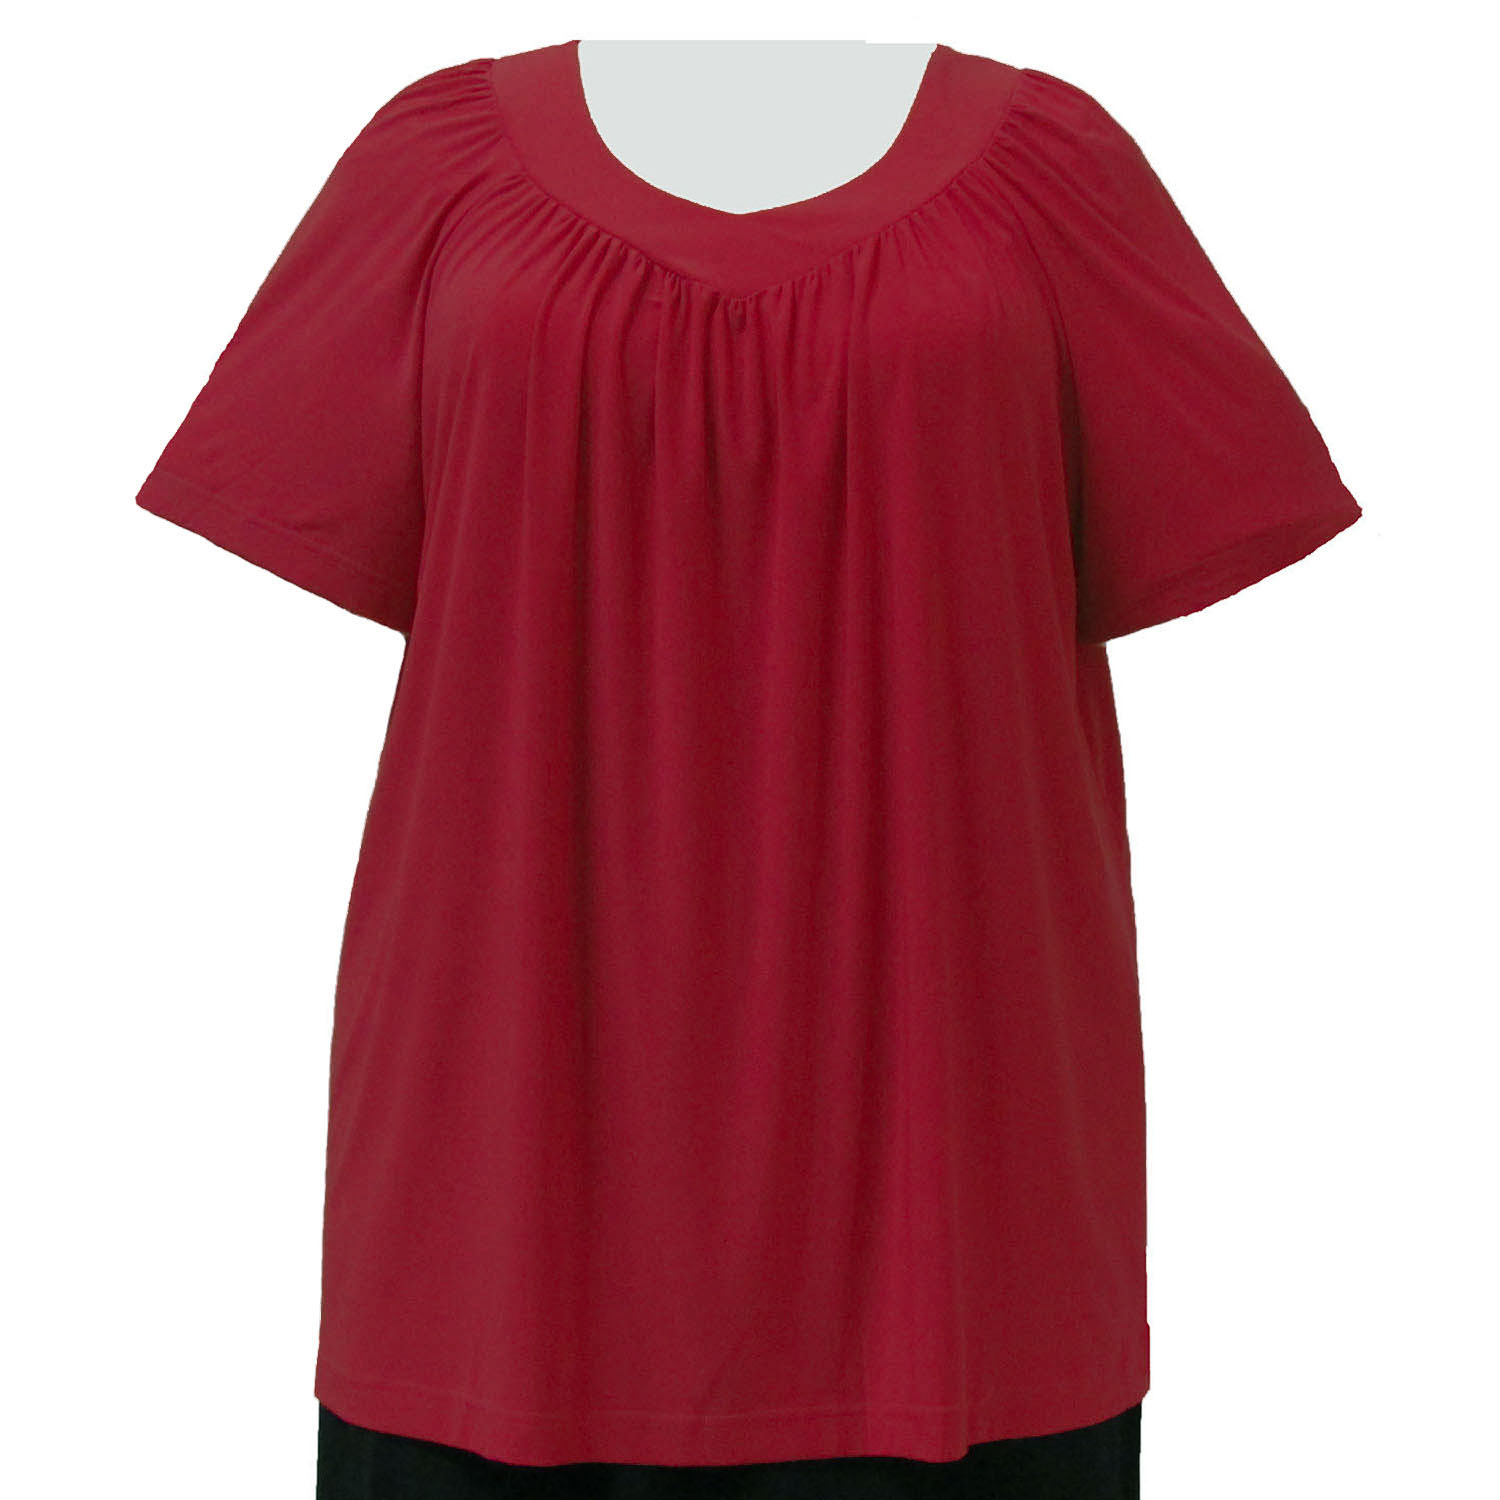 A Personal Touch Red V-Neck Pullover Top Plus Size Woman's Pullover Top